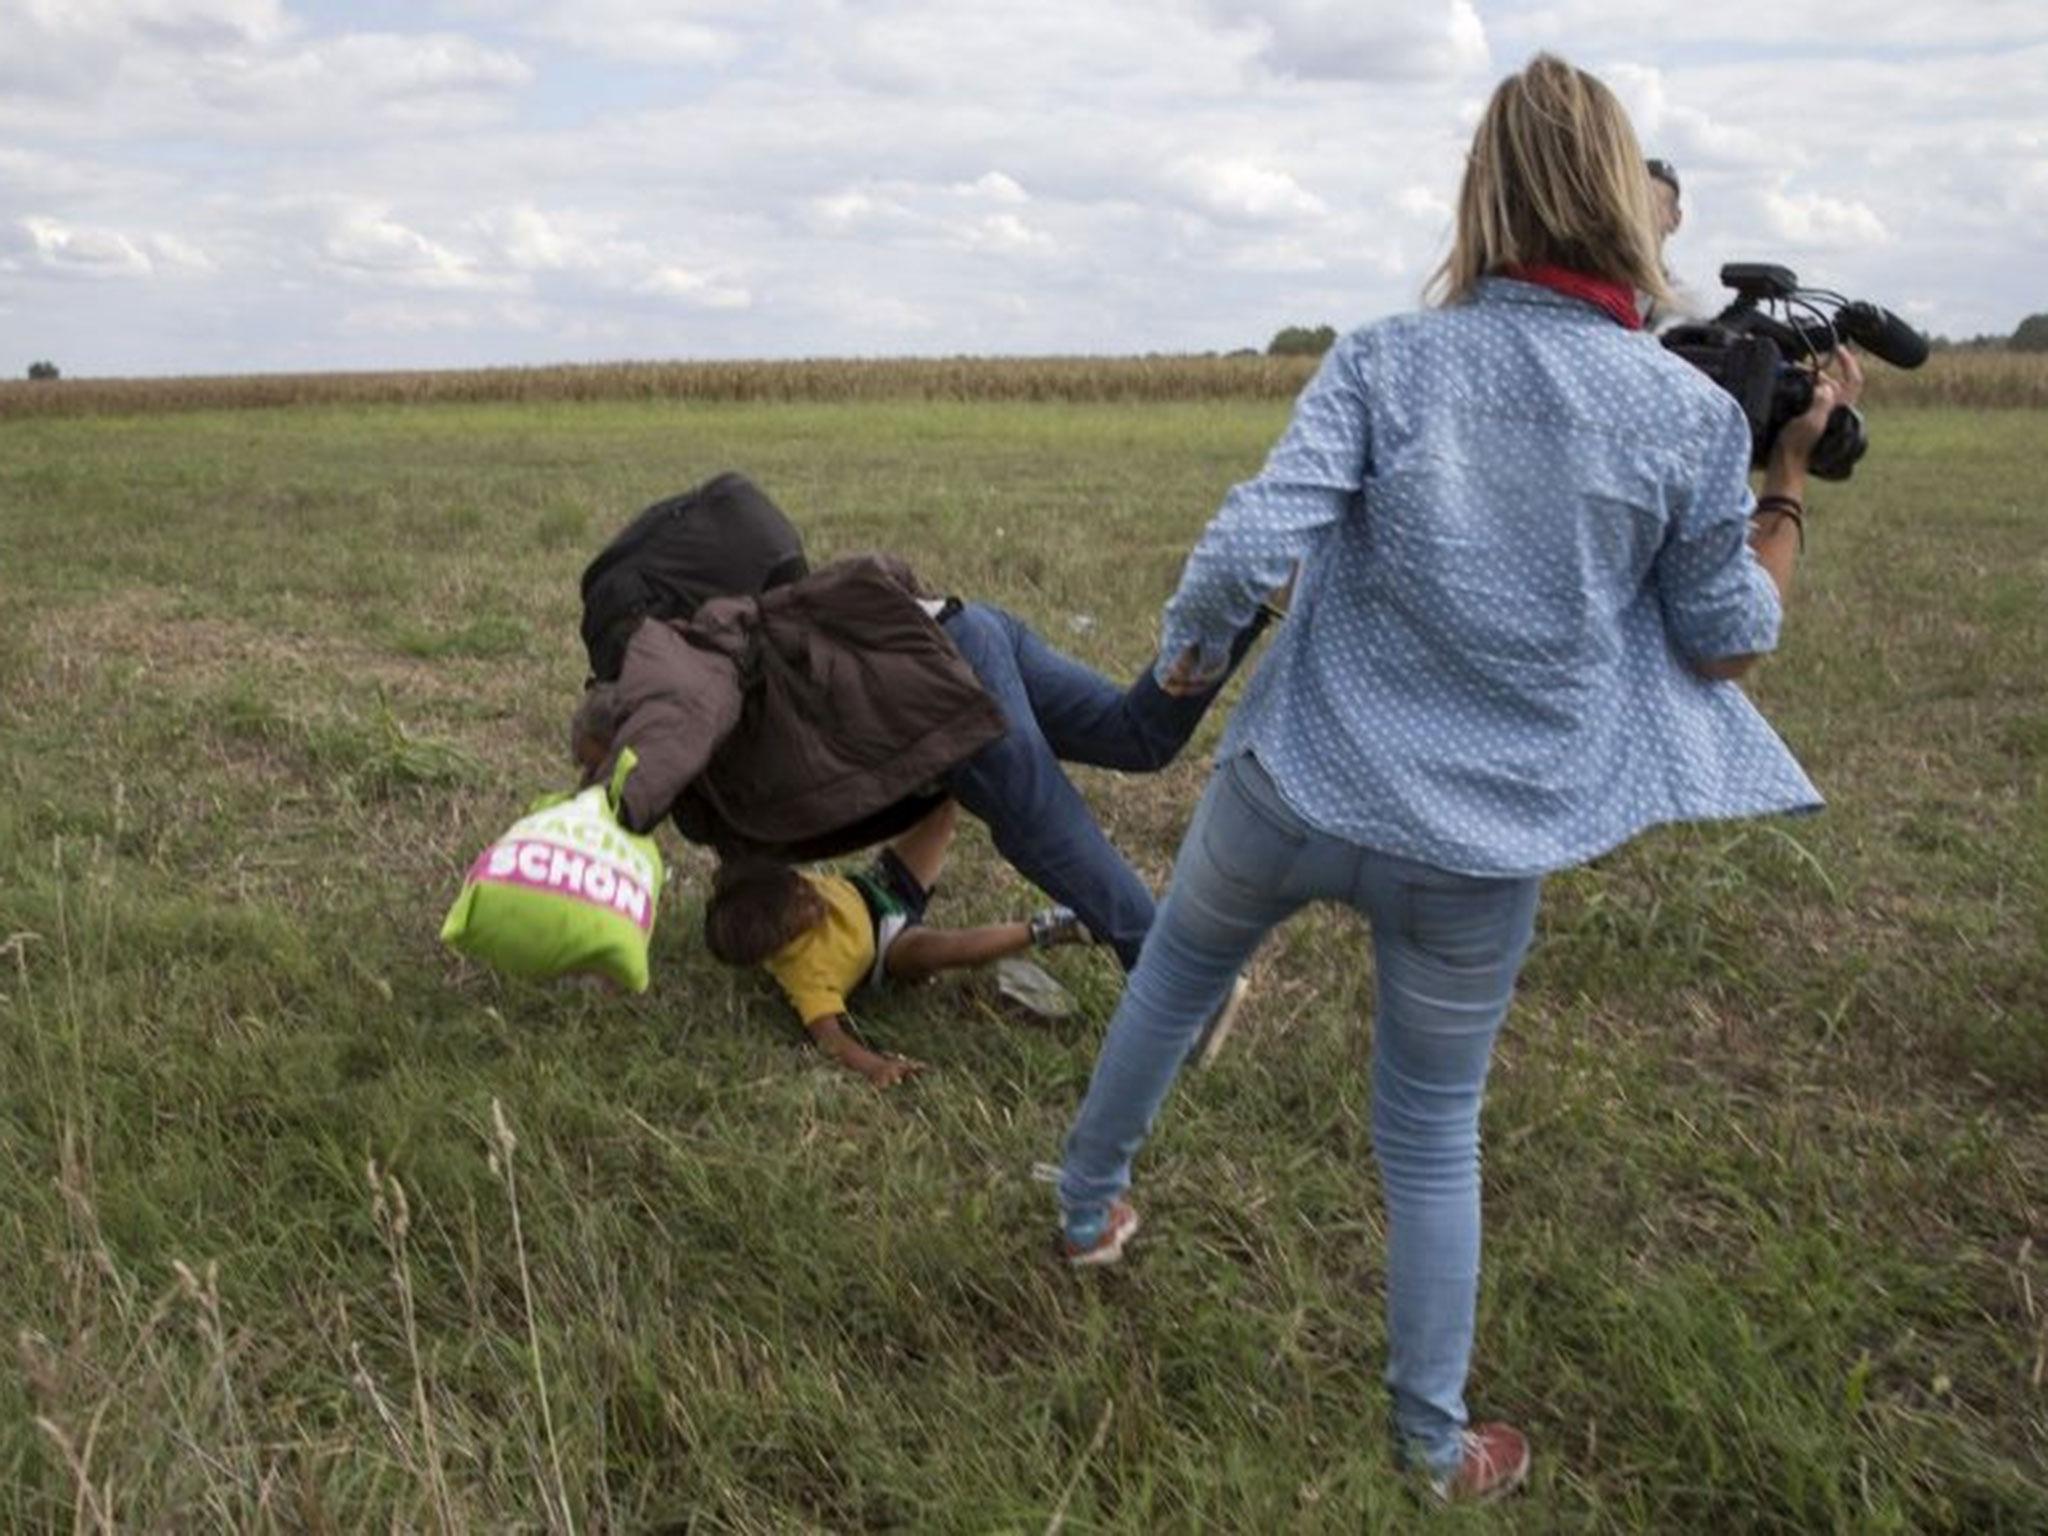 A refugee carrying a child falls after tripping on a TV camerawoman while trying to escape from a collection point in Roszke village